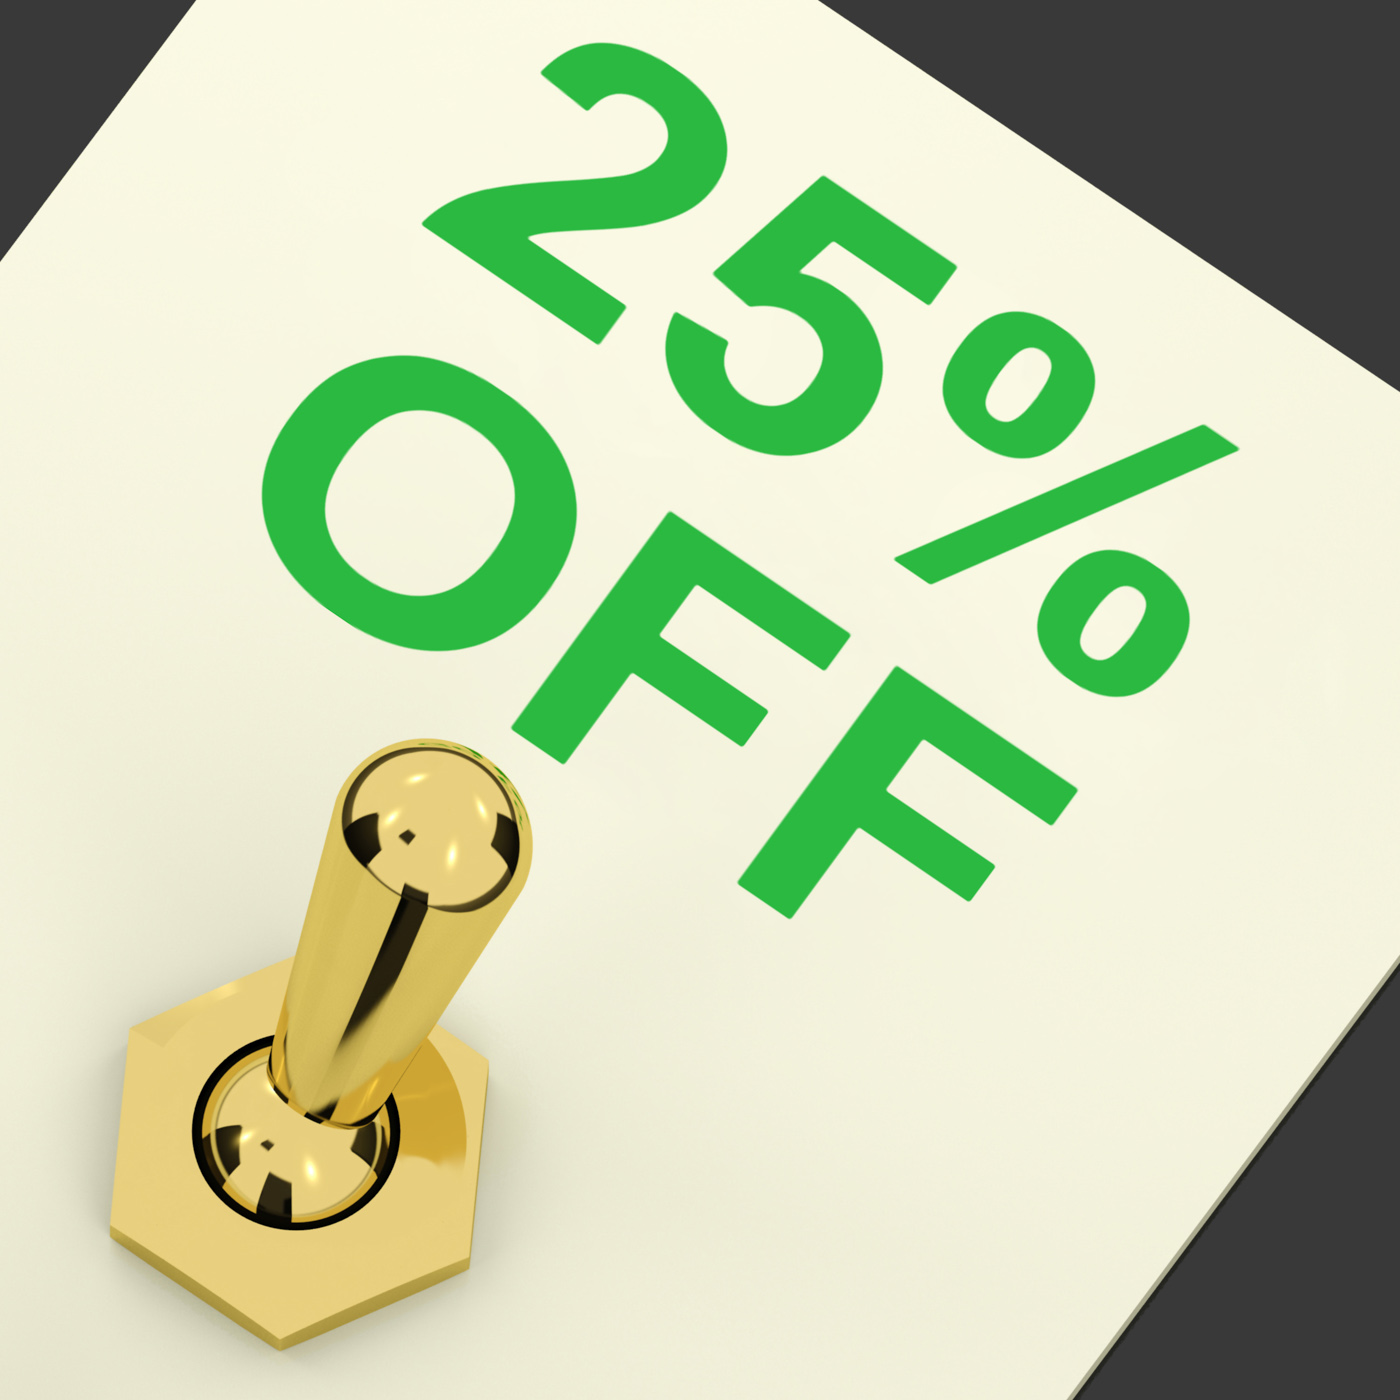 Switch shows sale discount of twenty five percent off 25 photo